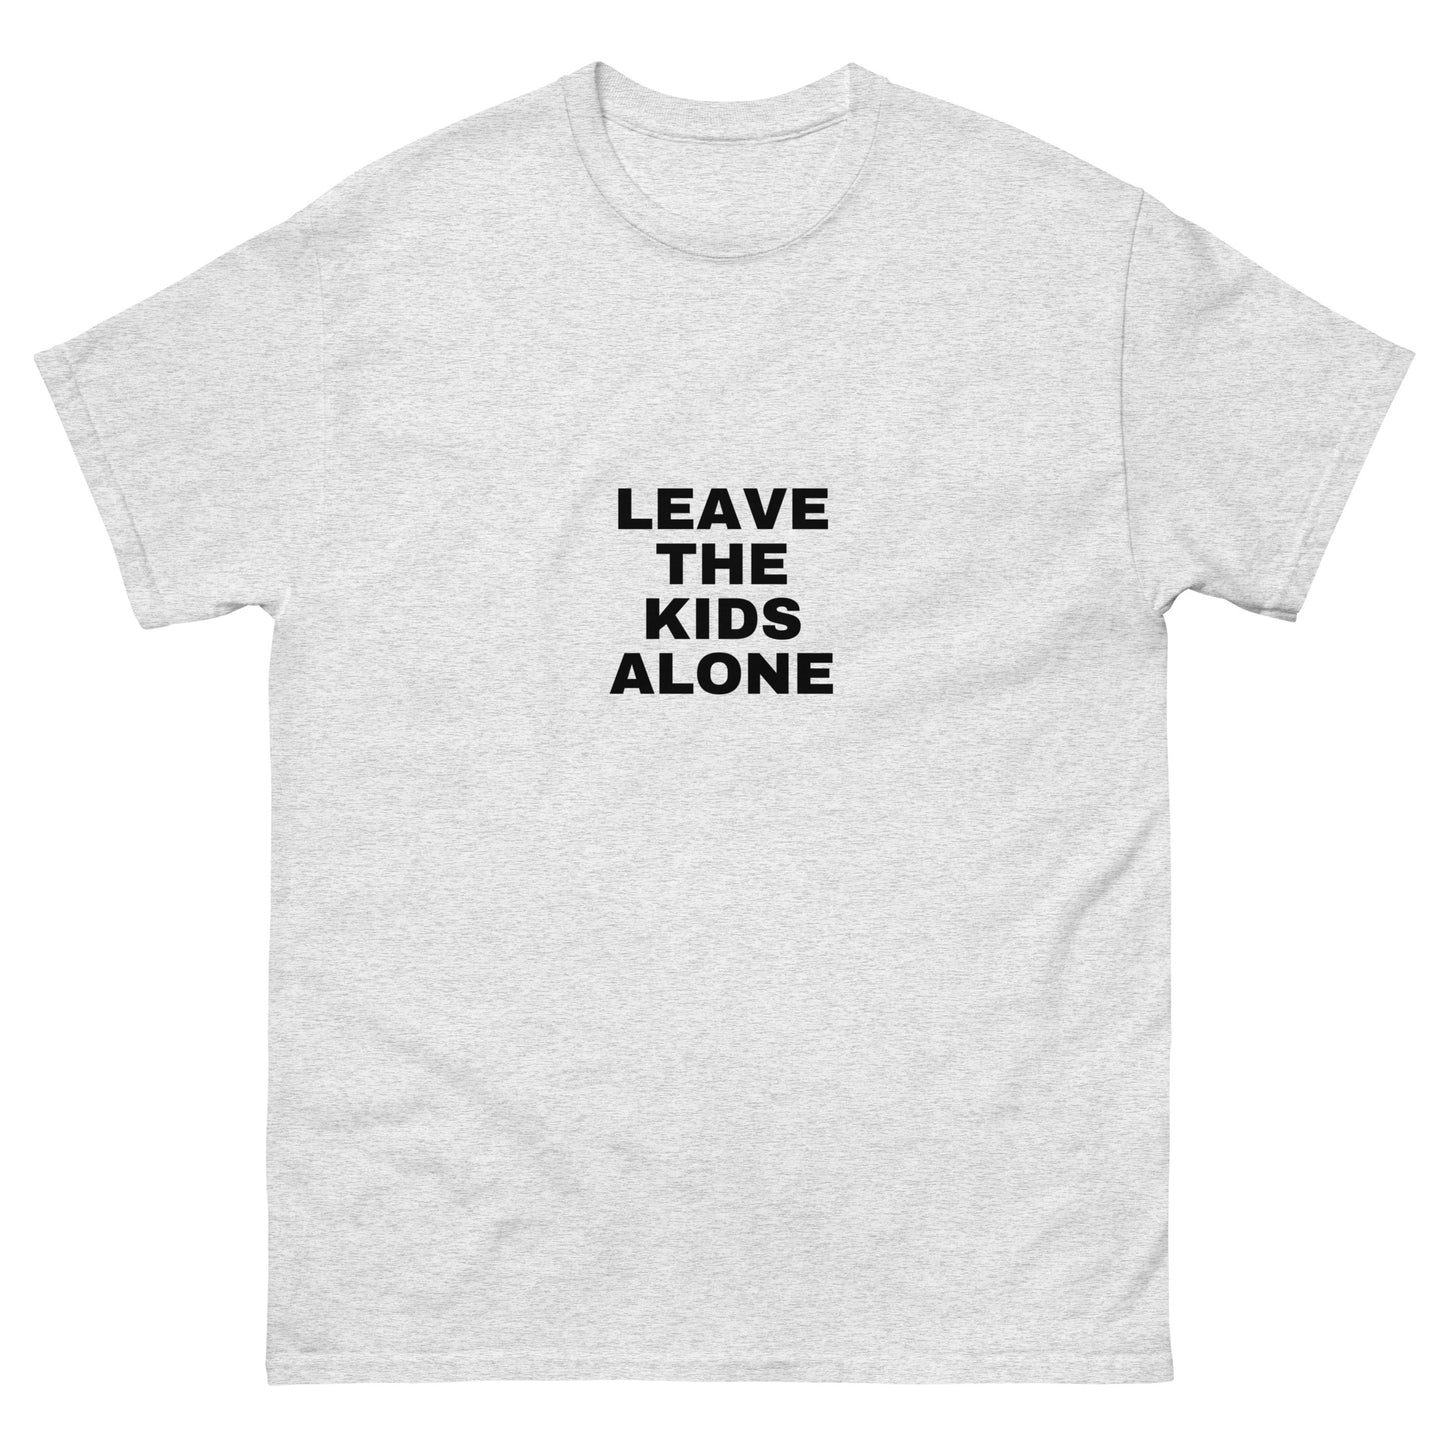 Leave The Kids Alone - Classic Tee